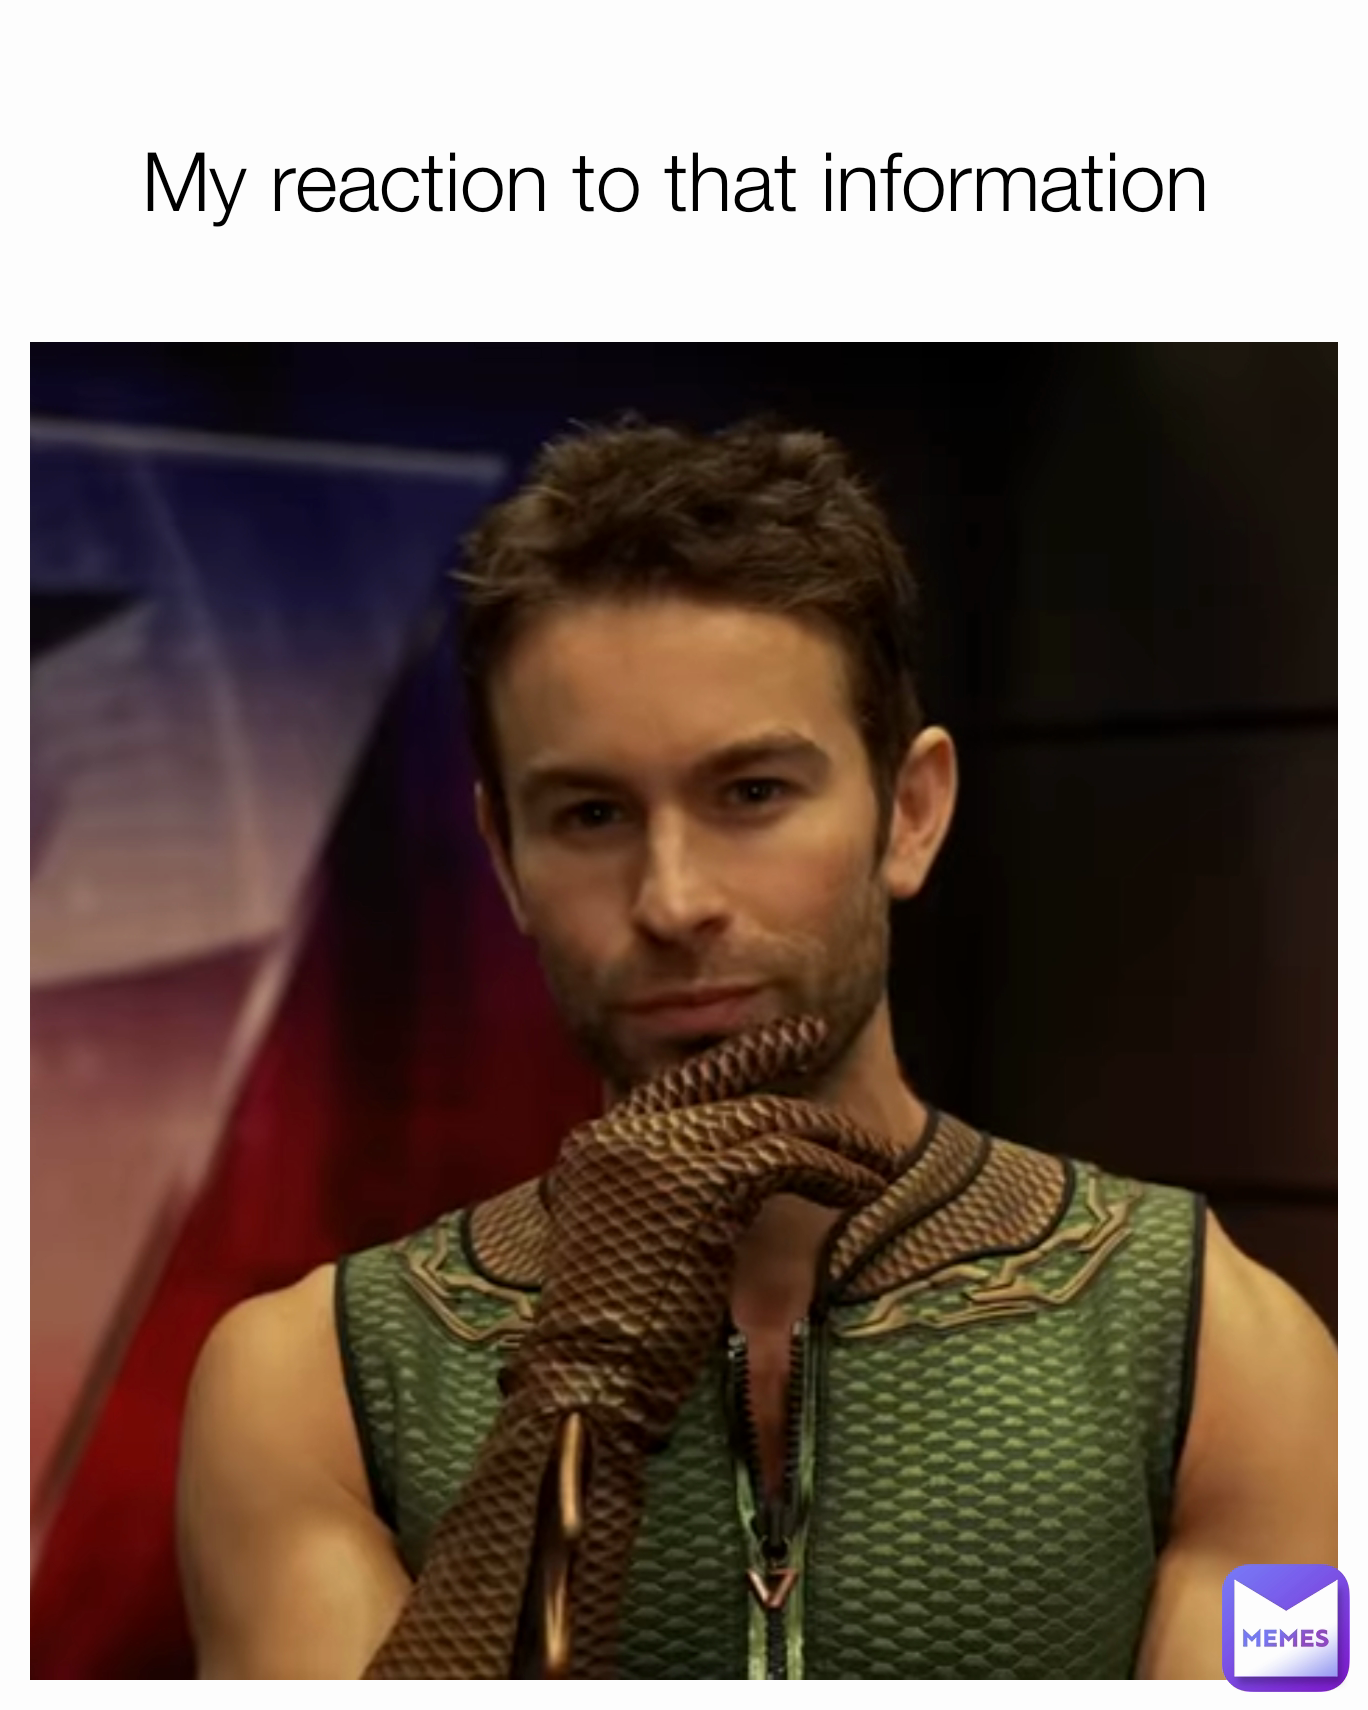 My Reaction To That Information Meme Template